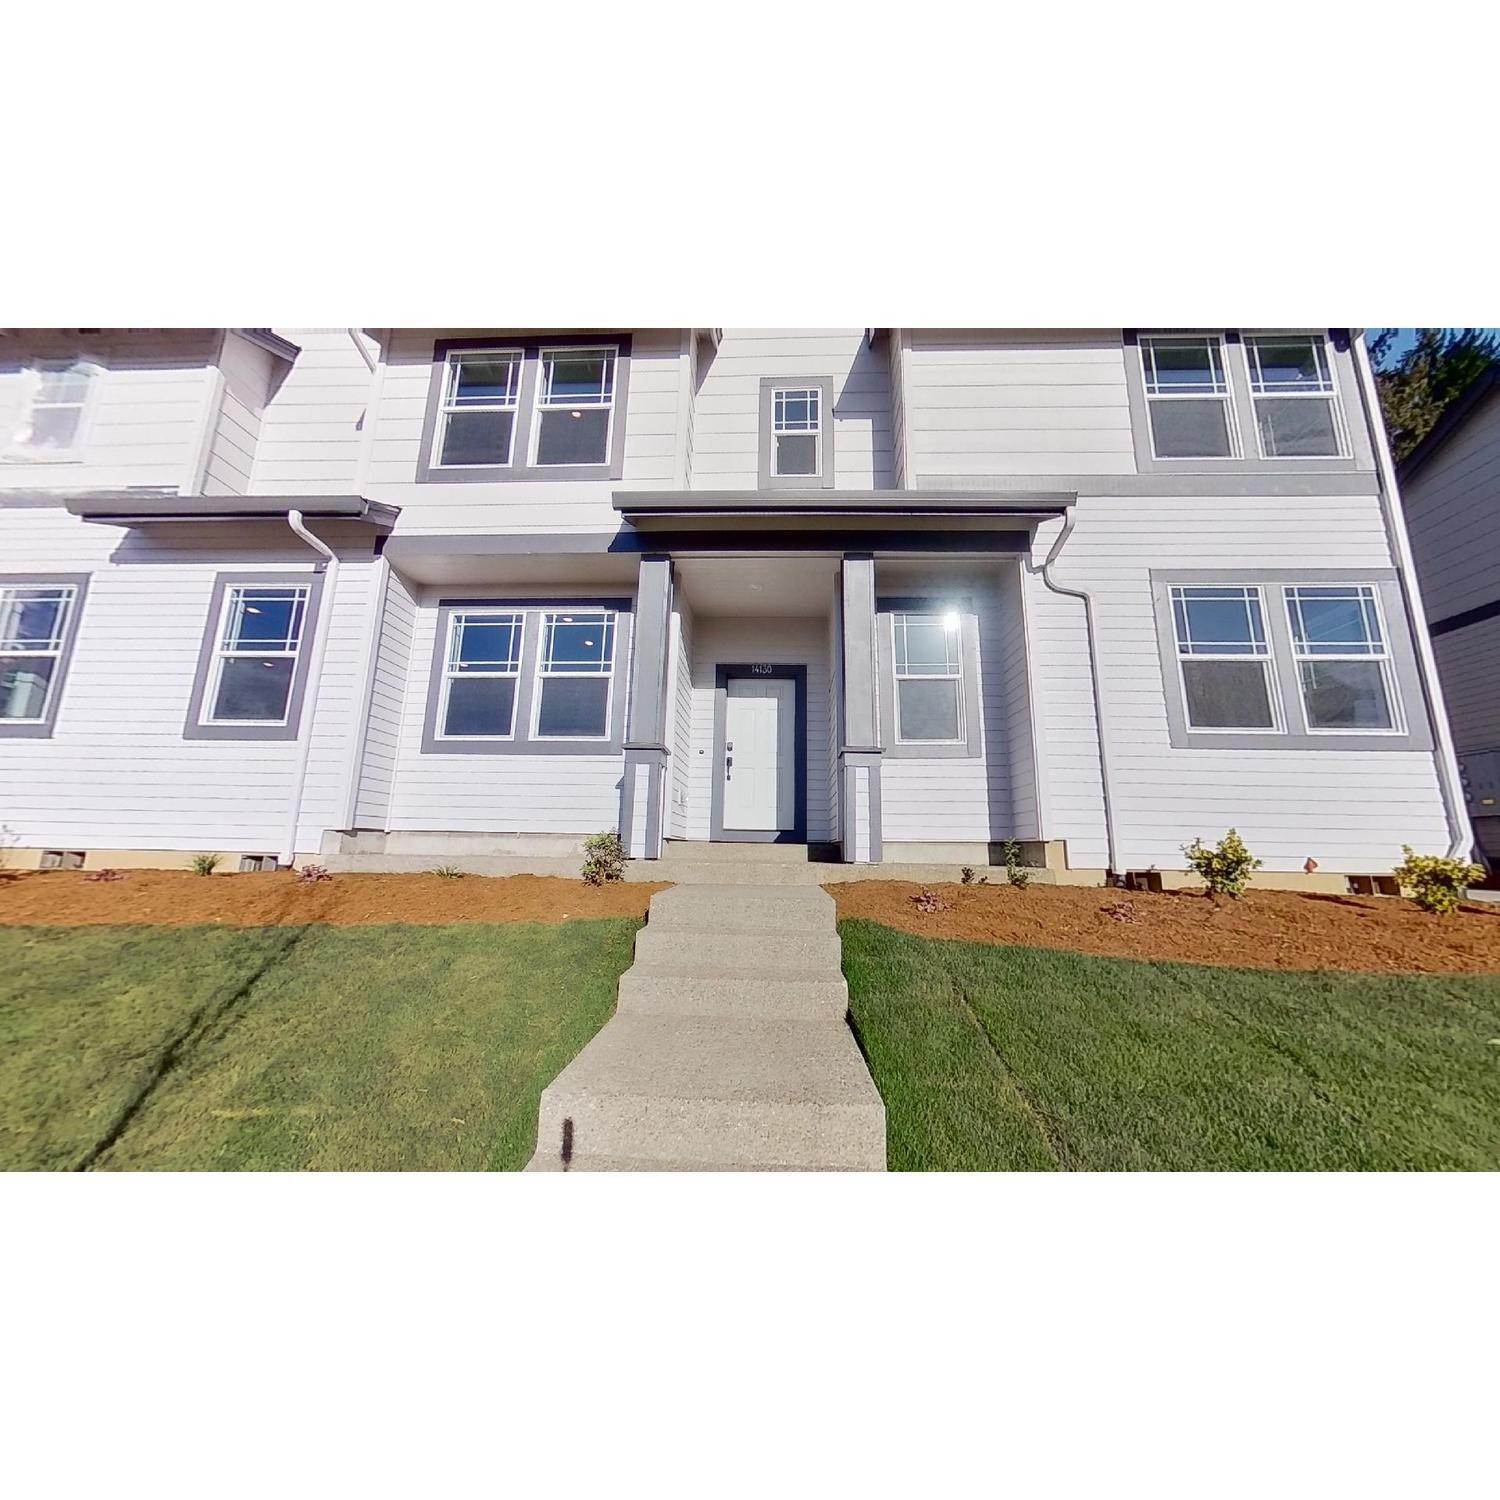 6. 16786 SW Leaf Lane, Tigard, OR 97224에 South River Terrace Innovate Condominiums 건물